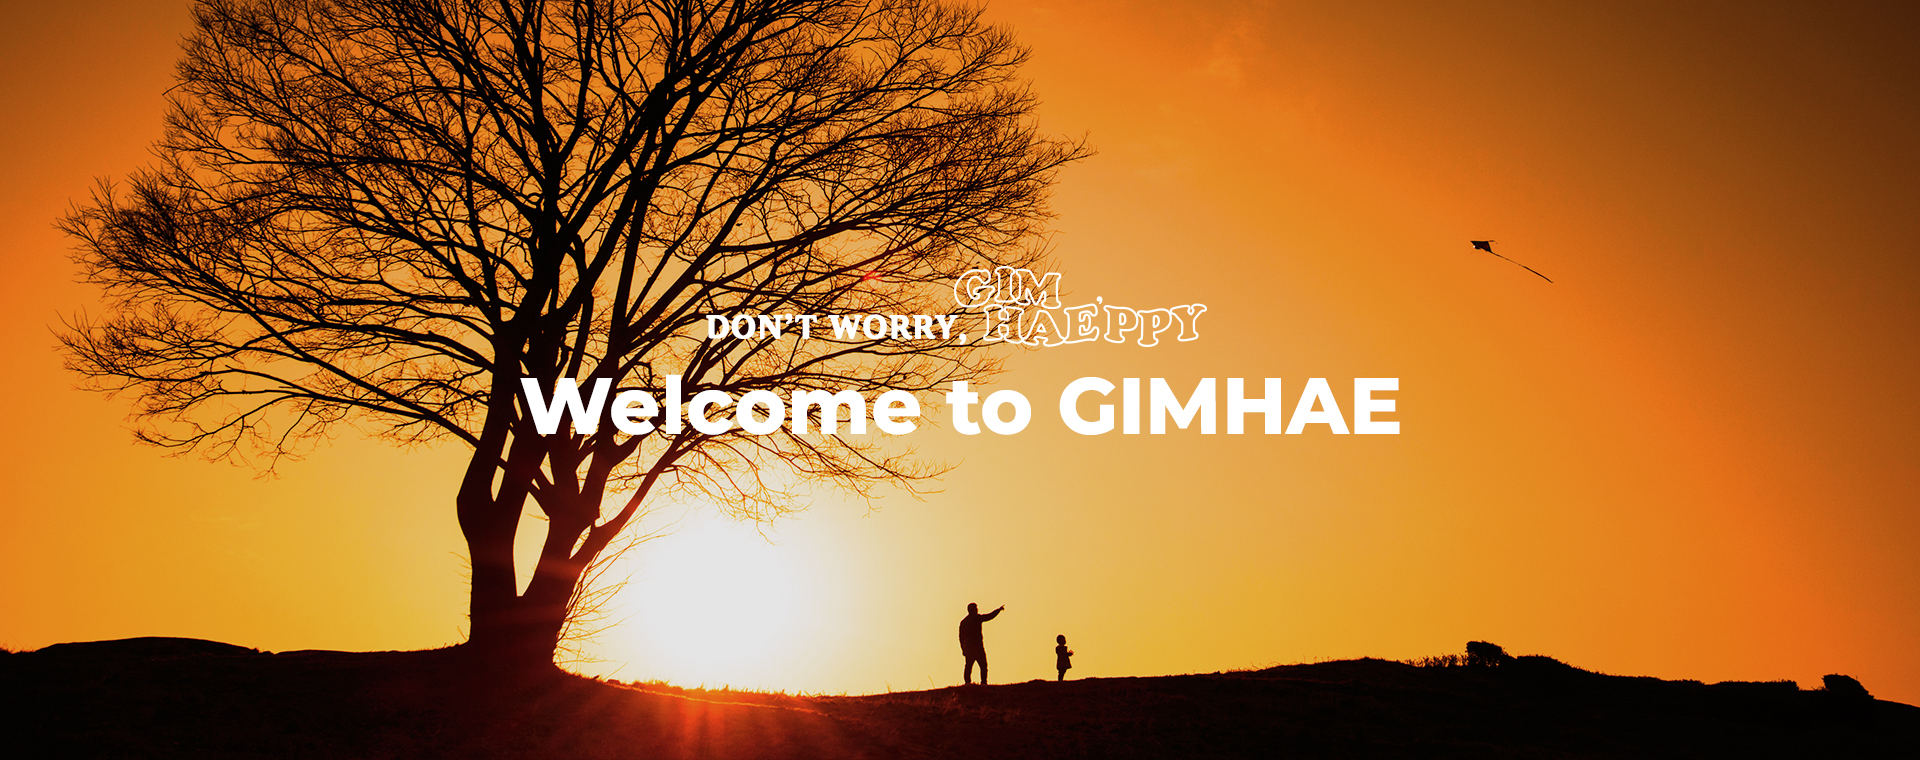 DON'T WORRY, GIMHAE'PPY Welcome to GIMGHAE